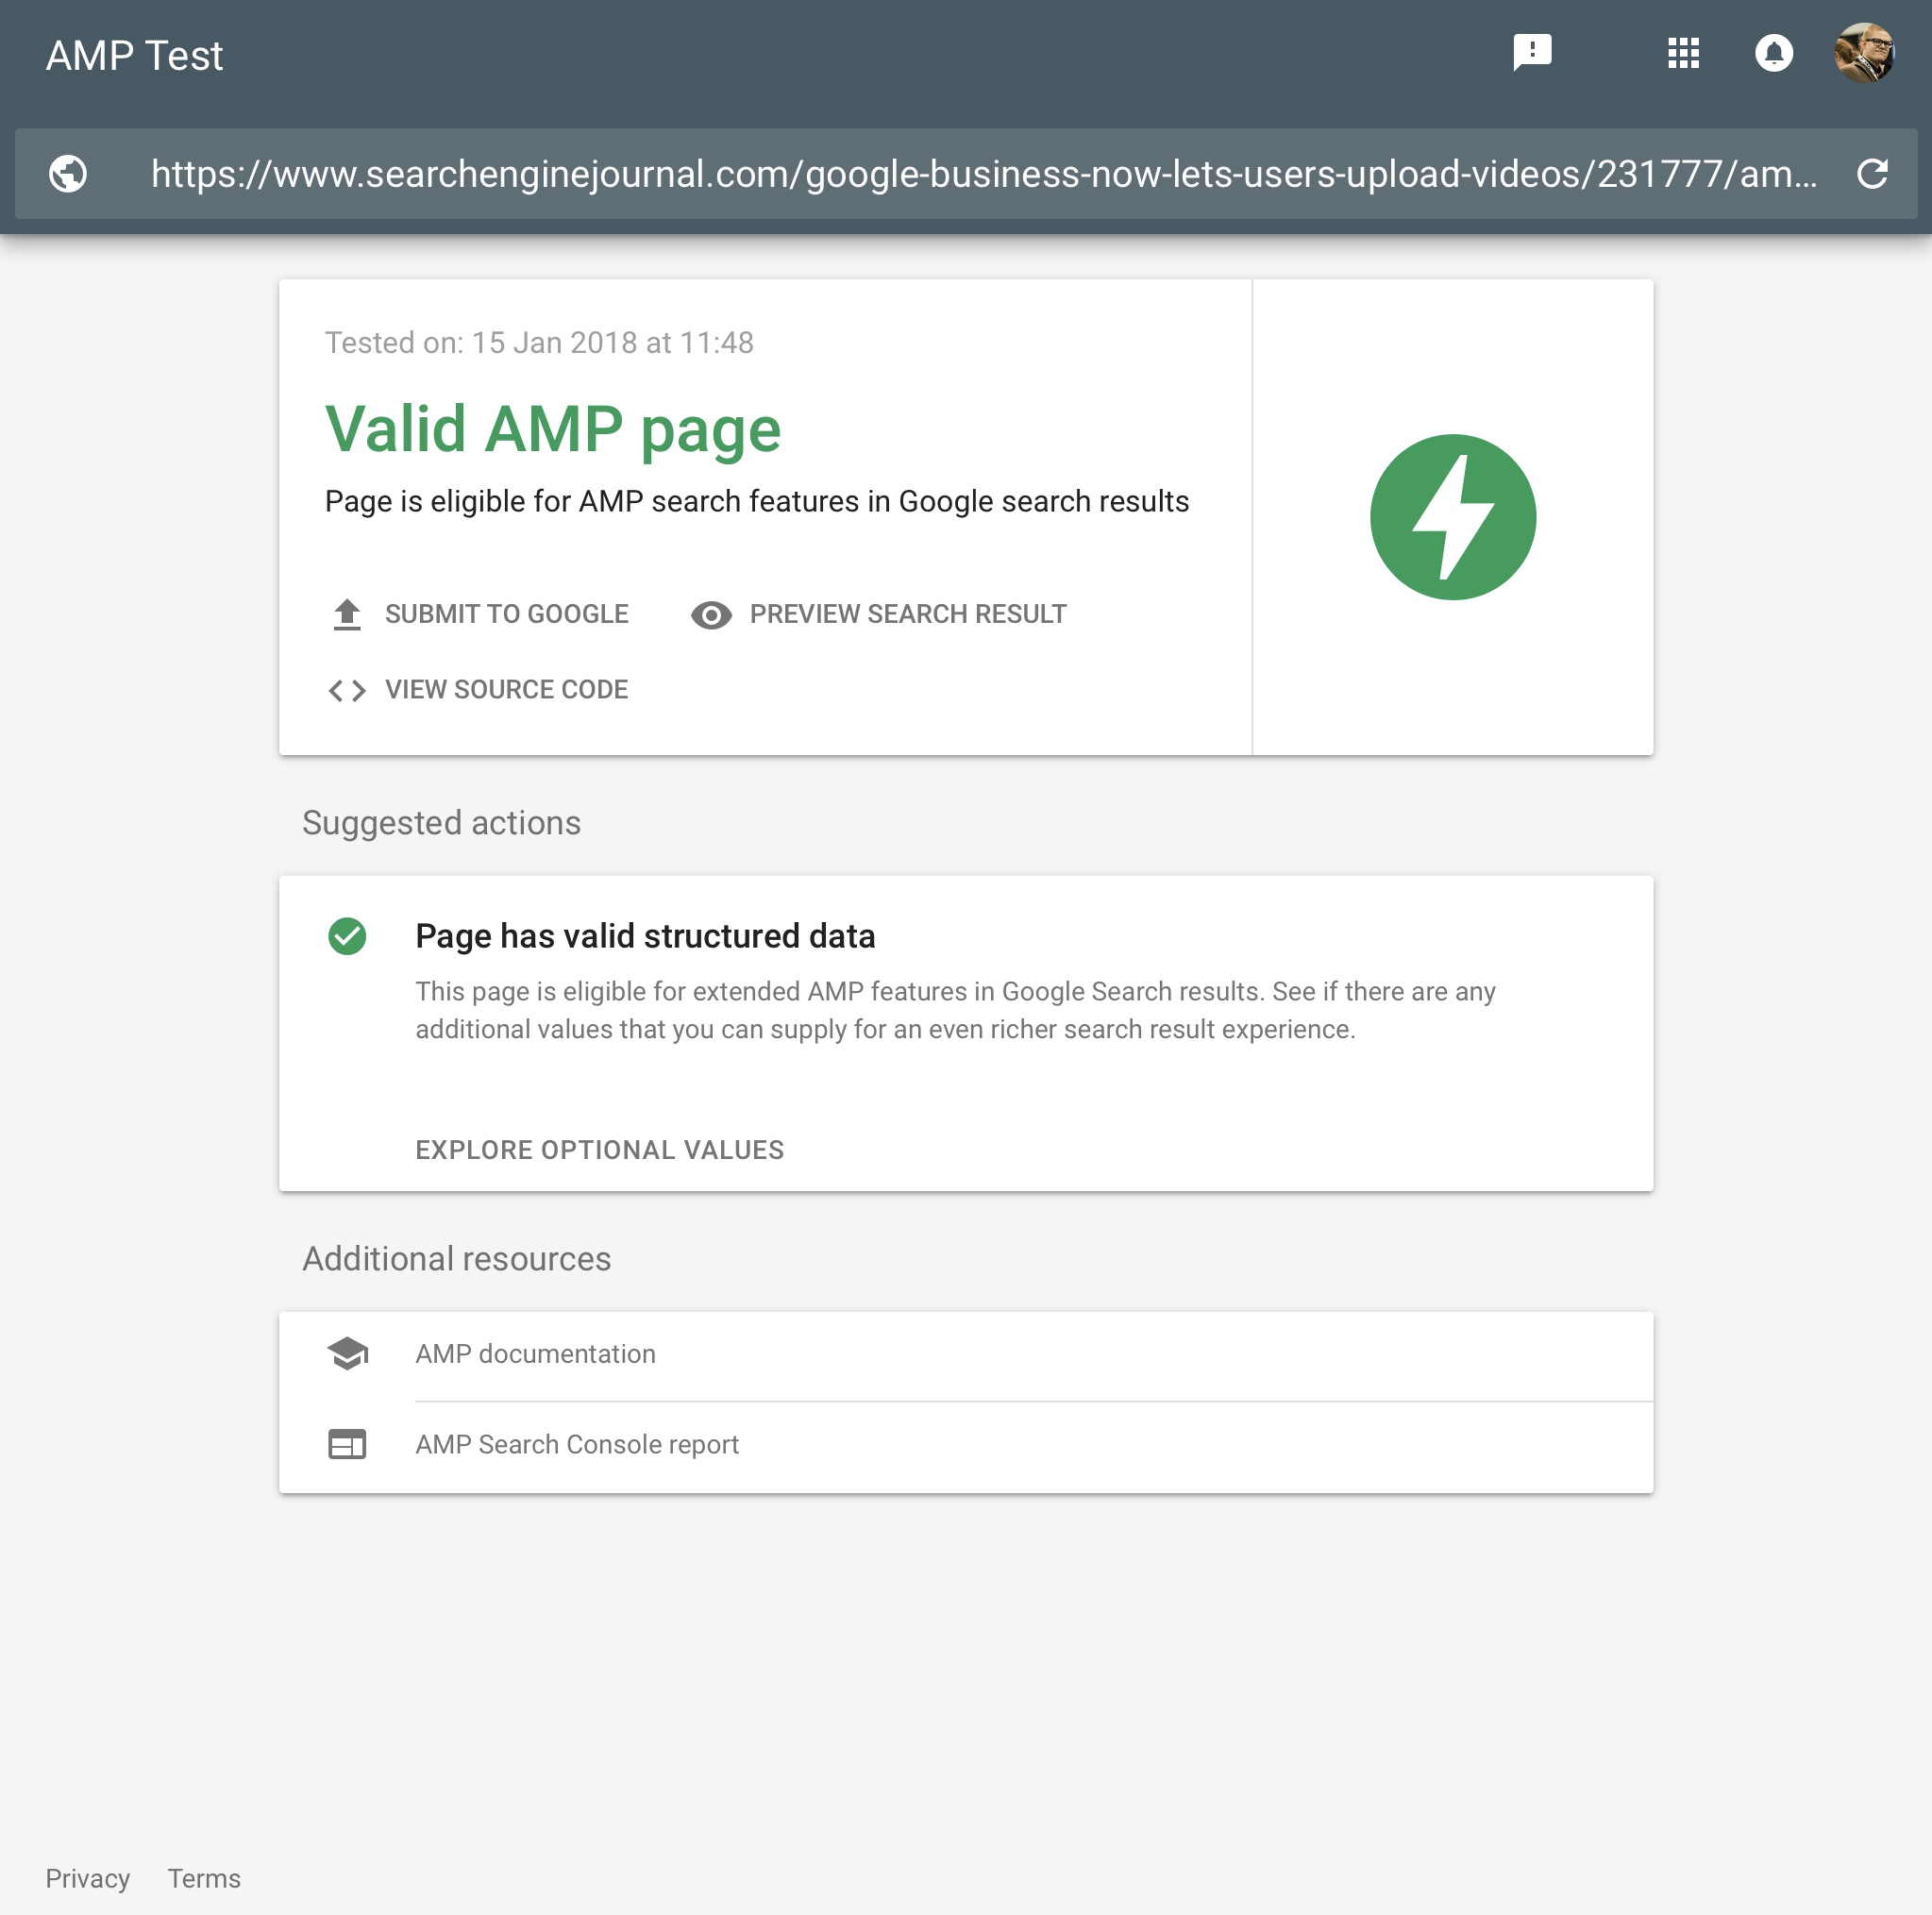 Google Adds AMP Testing Tool to Search Results